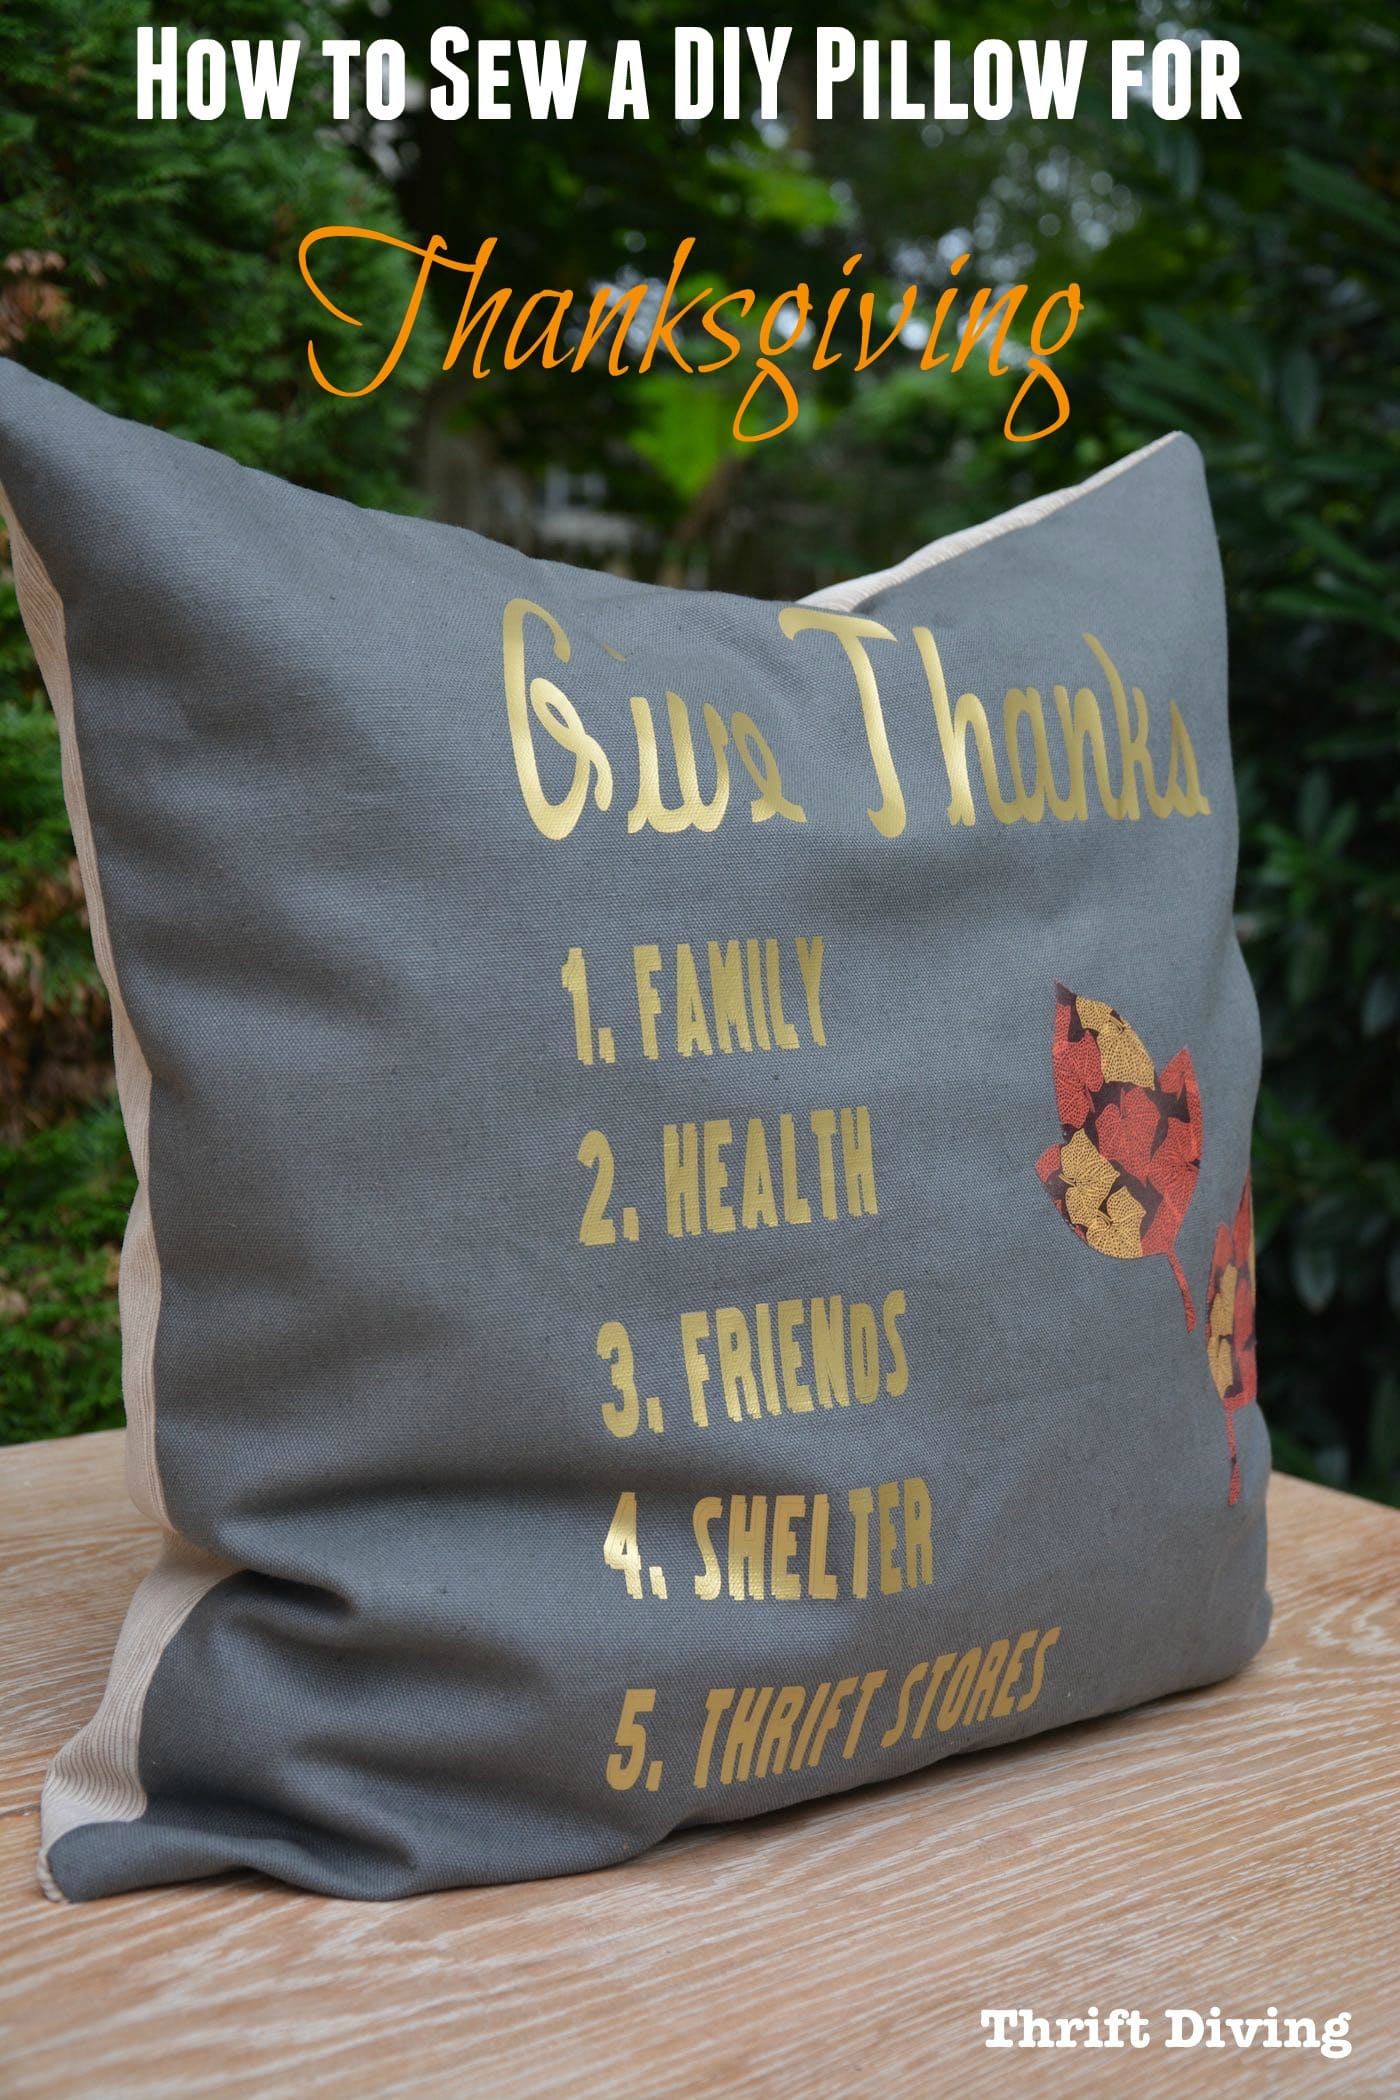 How to sew an iron-on DIY pillow for Thanksgiving